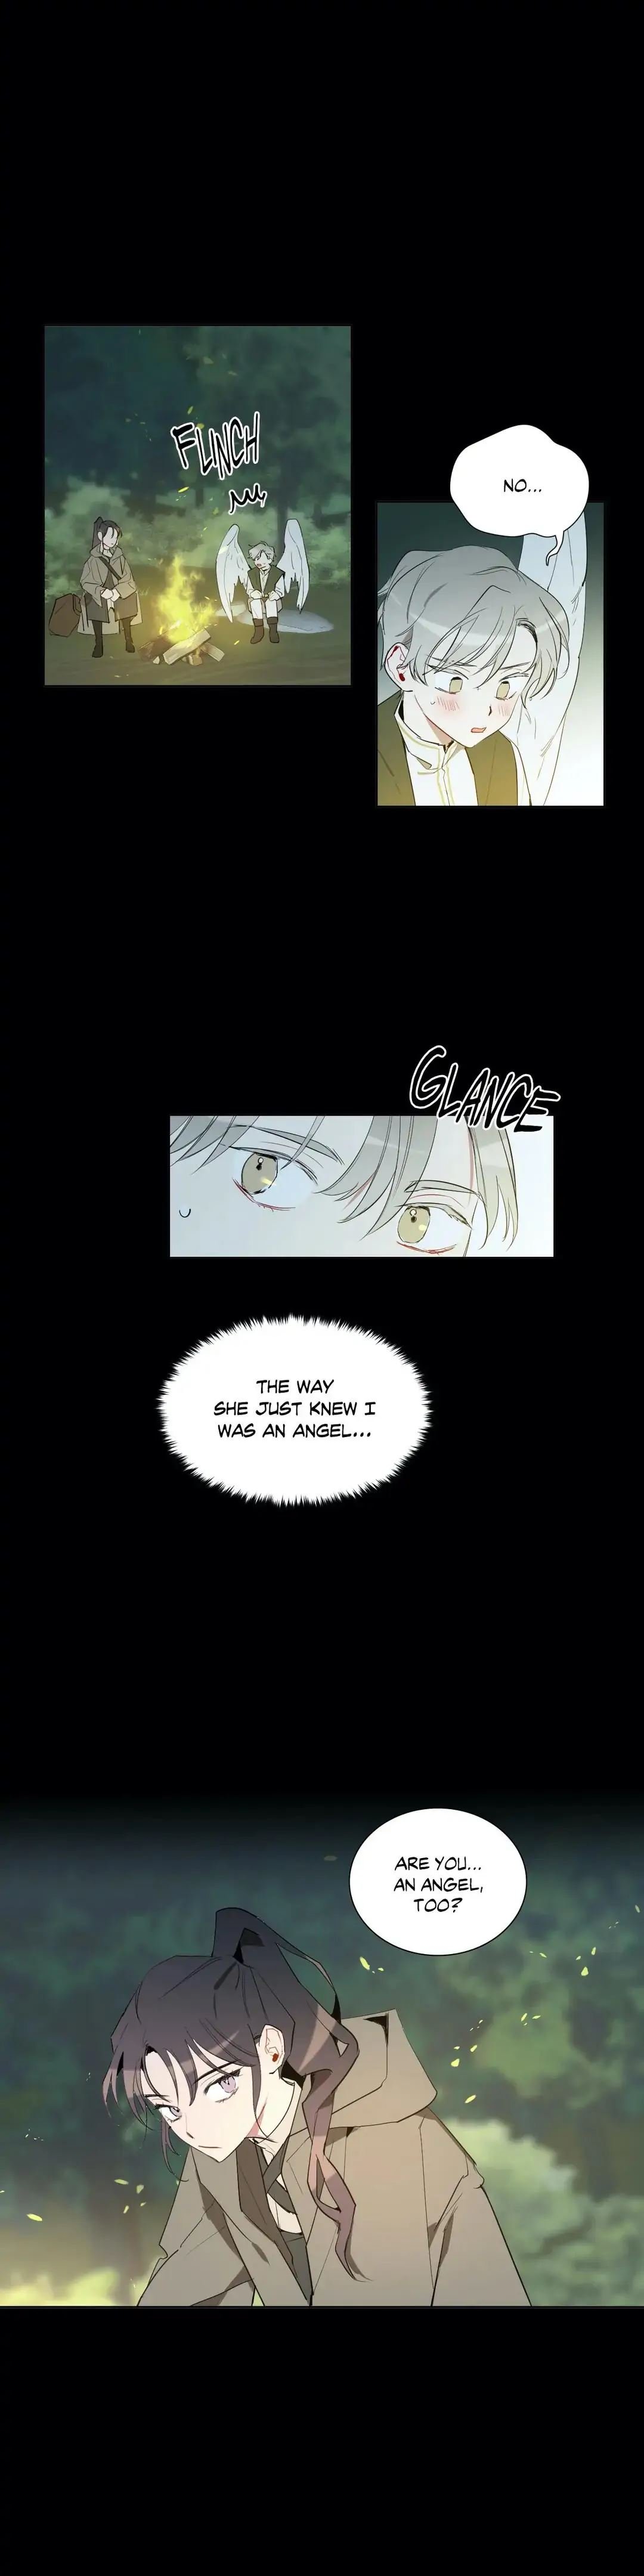 how-to-use-an-angel-chap-46-8